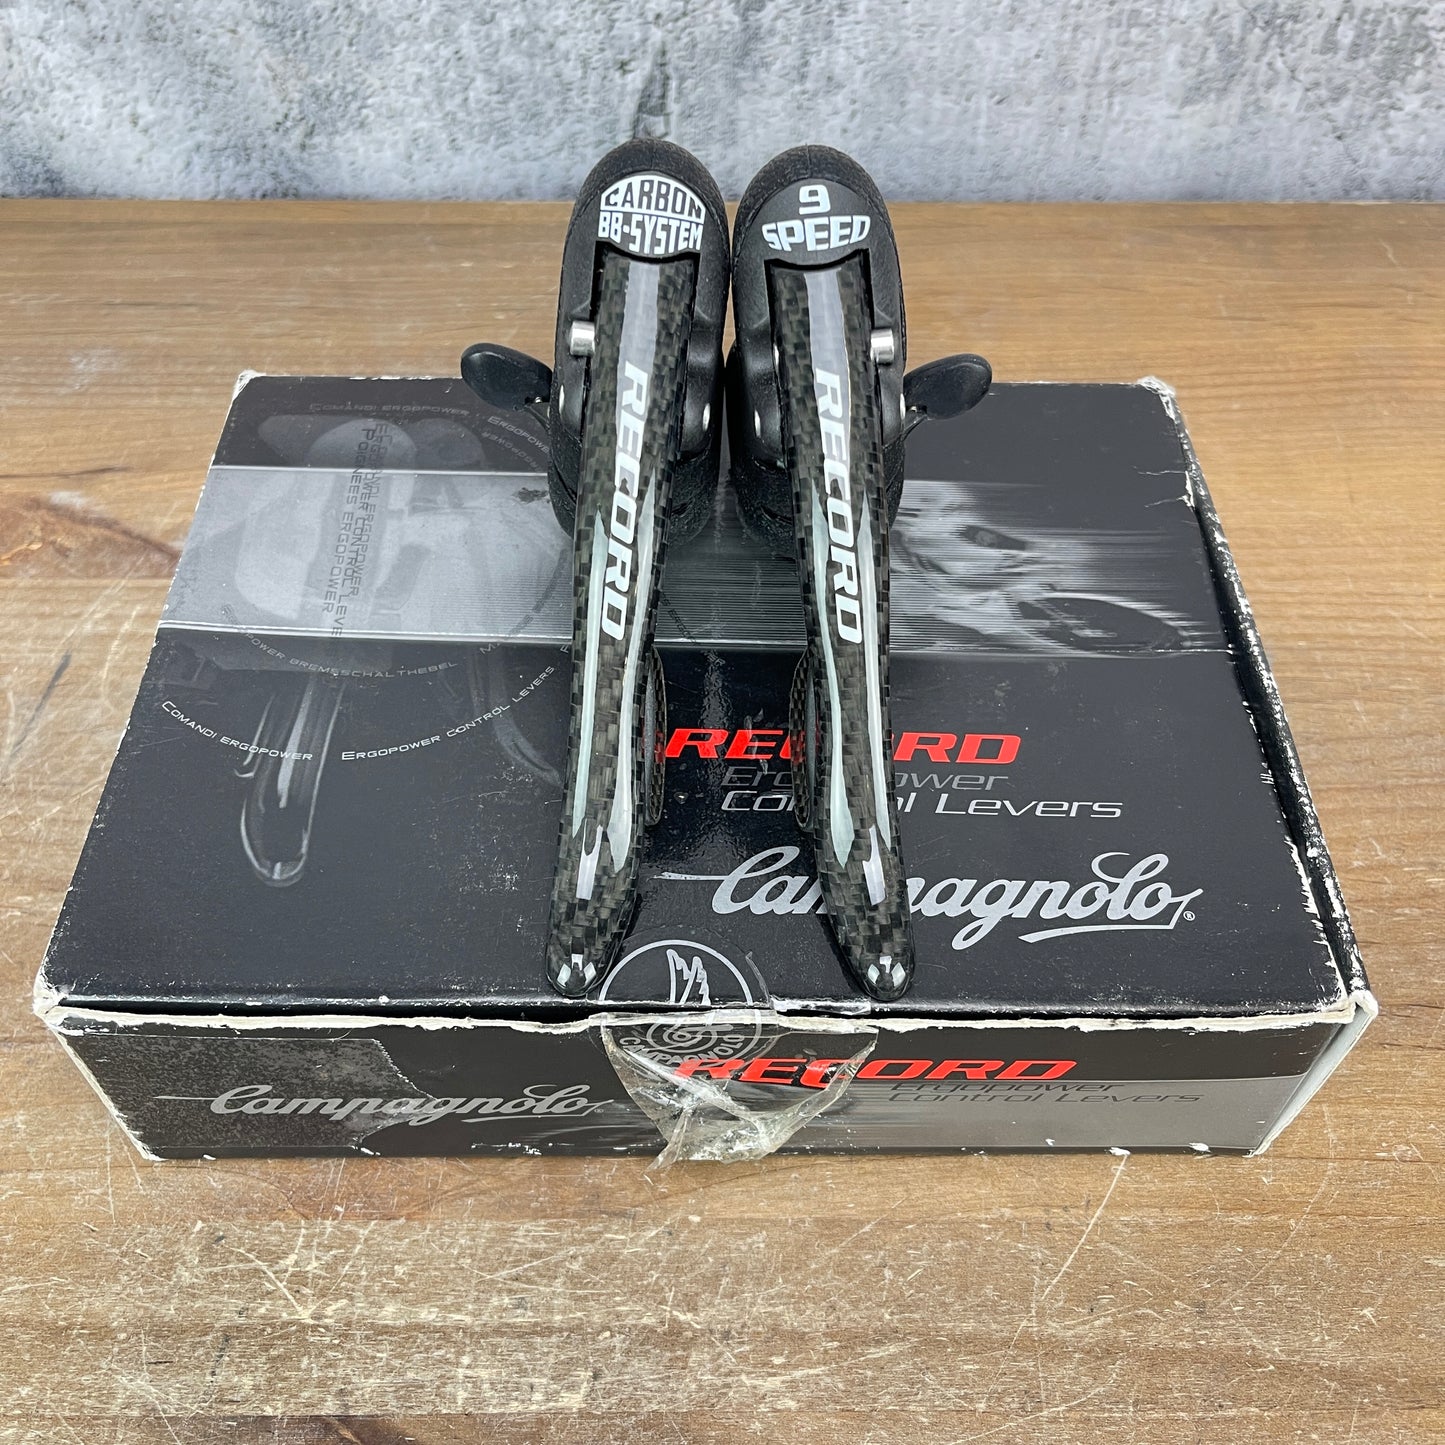 New! Vintage Campagnolo Record 9-Speed Ergopower EP01-RE09 Carbon Shifters